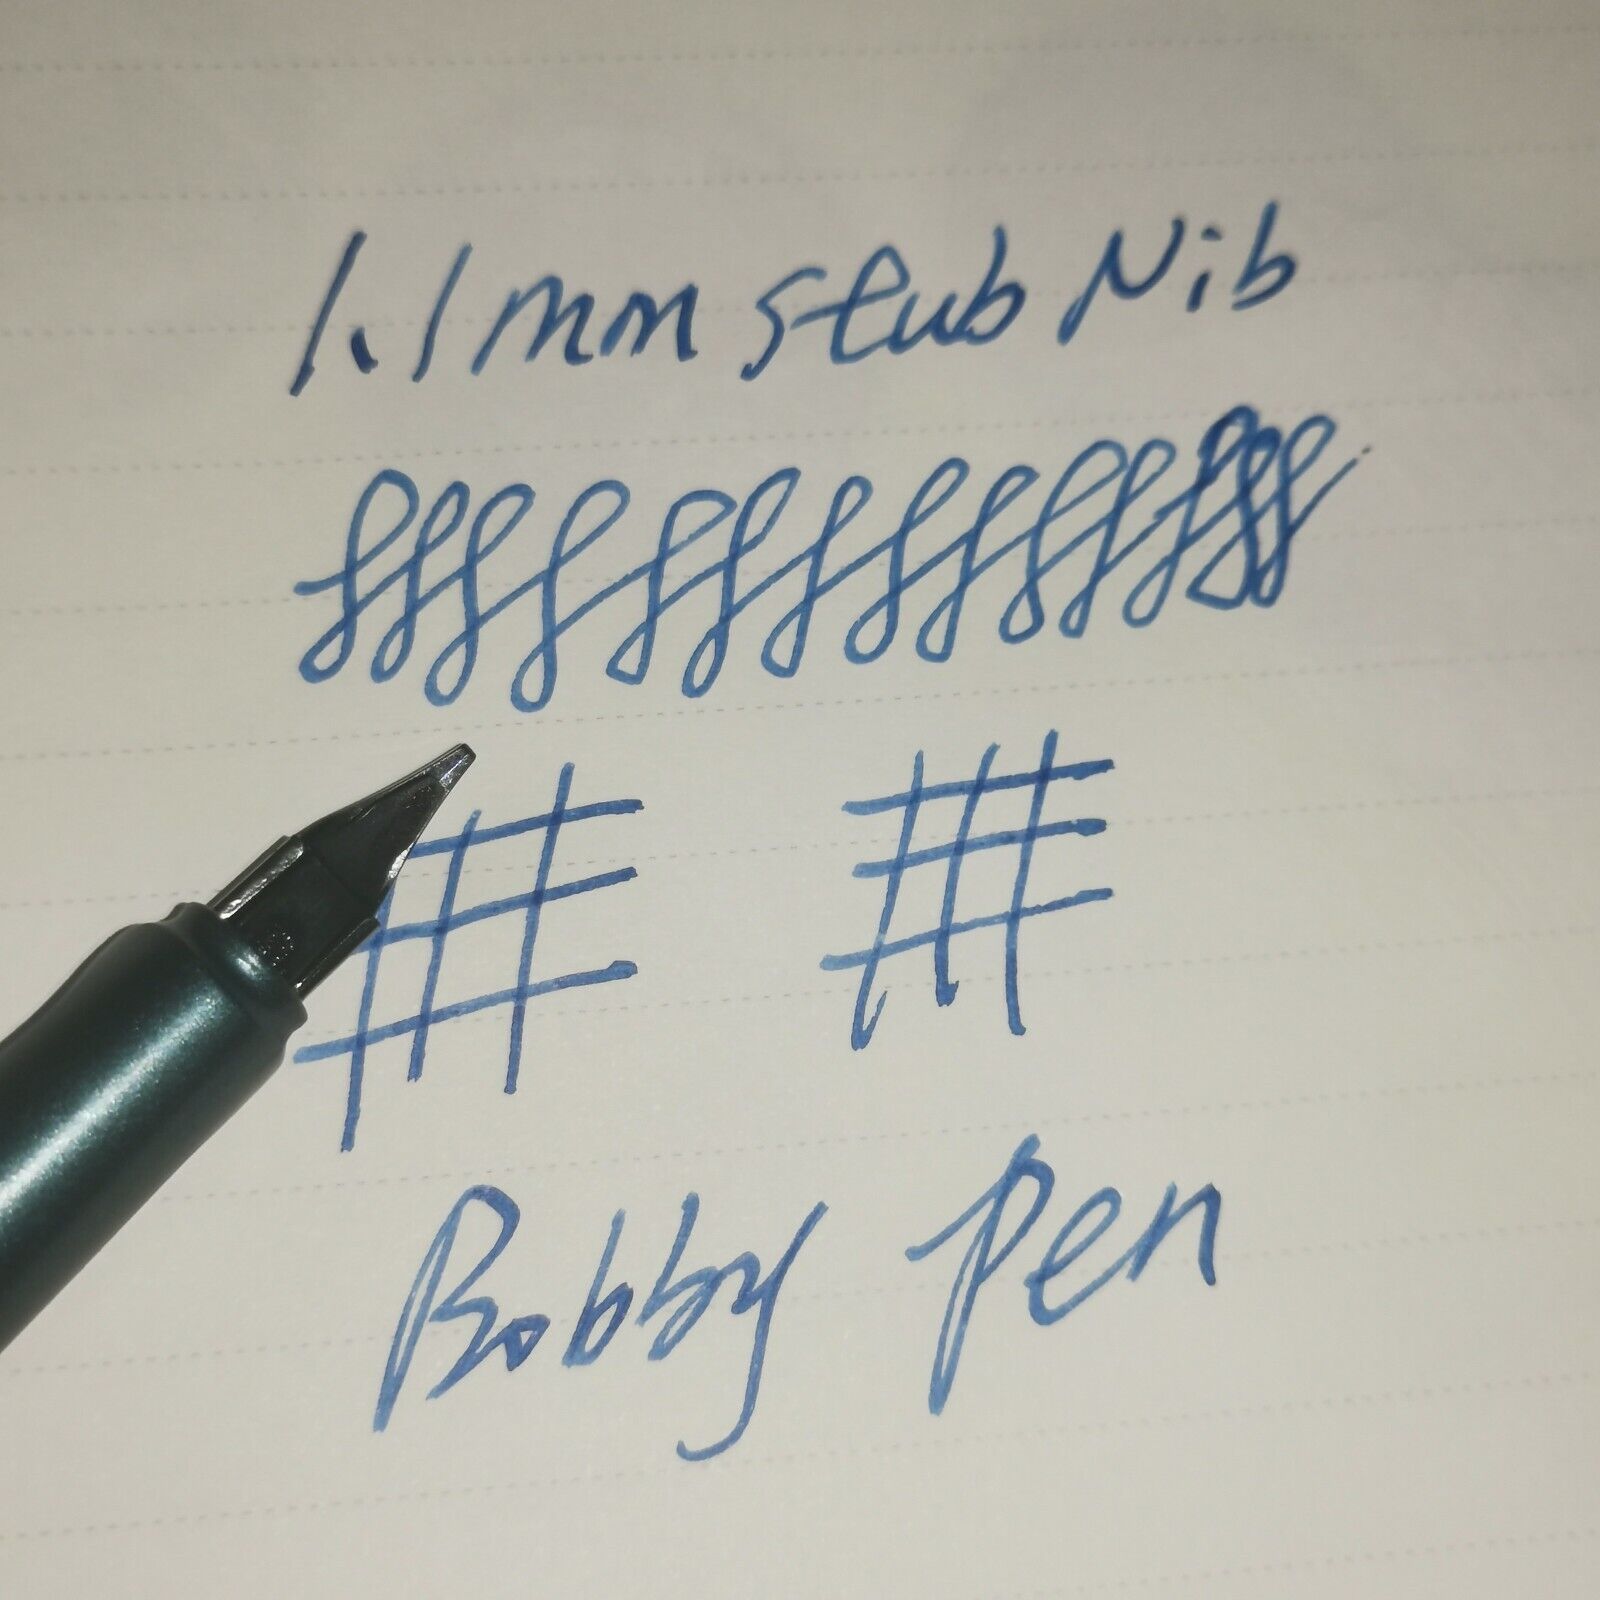 1.1mm/1.5mm/1.9mm Stub Nibs Or Feed For LAMY/Yong Sheng 3008/Hero 359